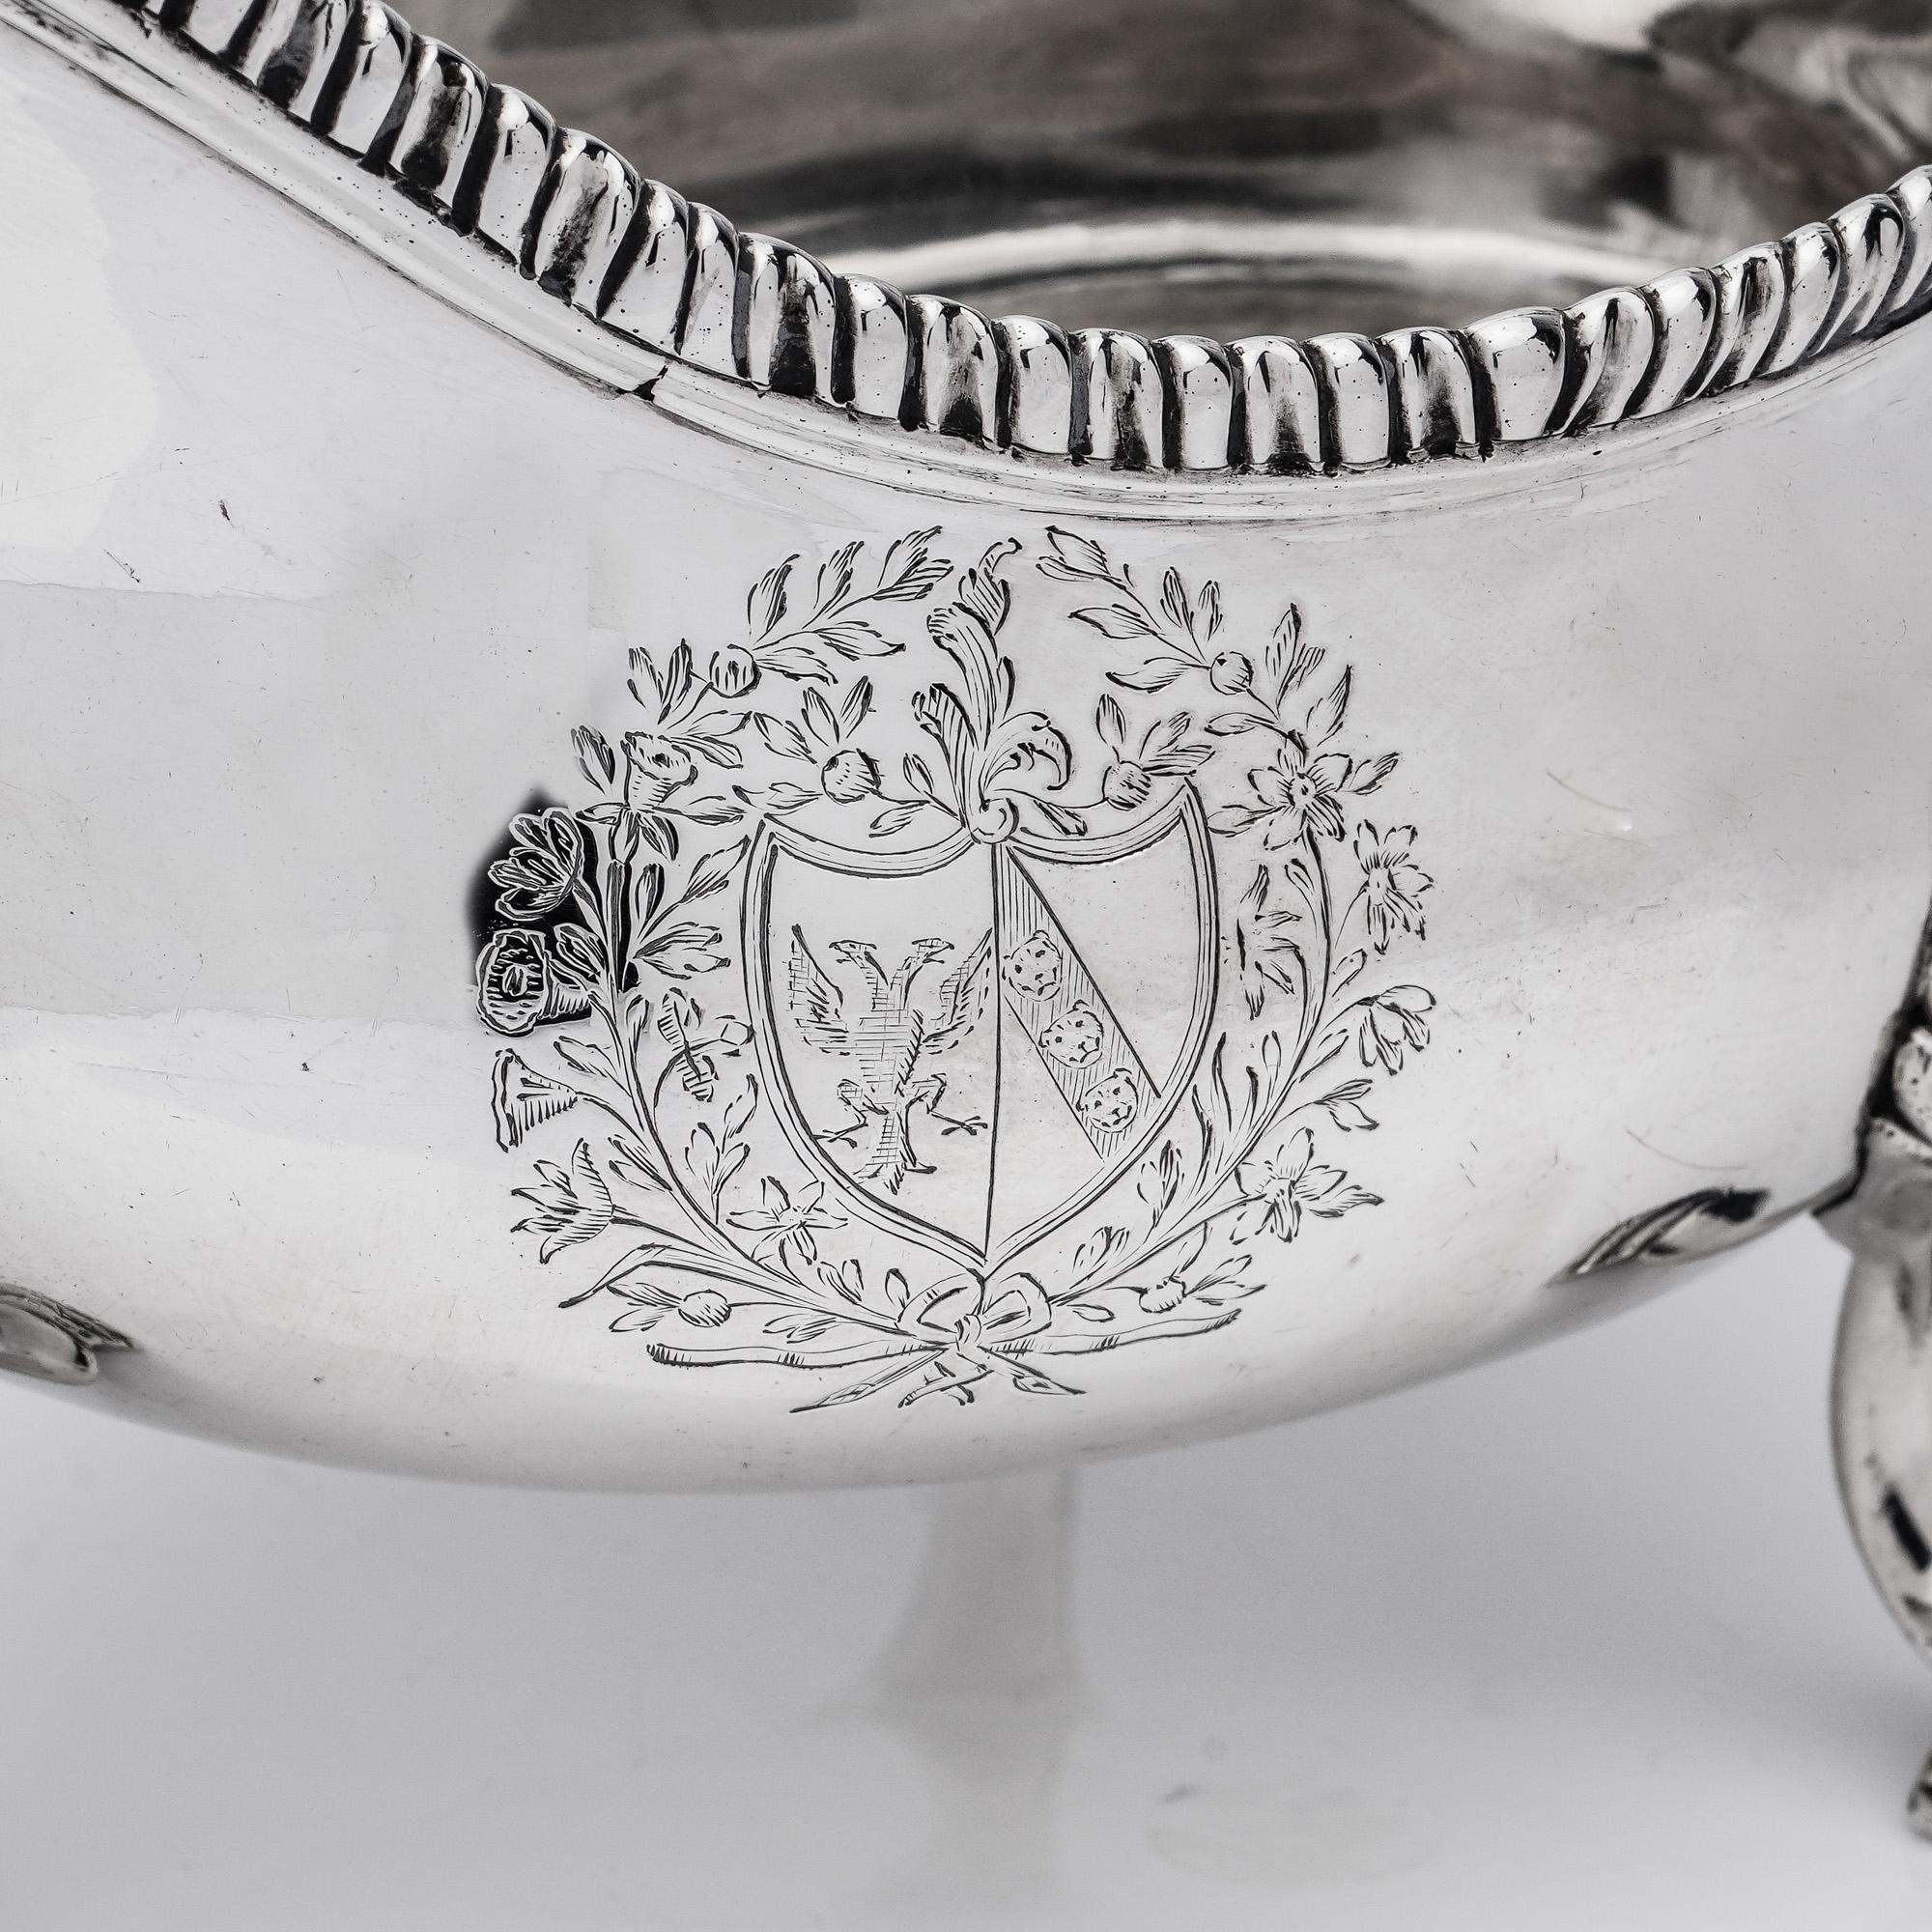 Antique George III sterling silver pair of sauce boats with coat of arms. 
Maker: George Smith (II)
Made in London, 1767
Fully hallmarked.

Pair of sauce boats are oval shaped, with leaf-capped scroll handles, shell feet and gadroon borders,